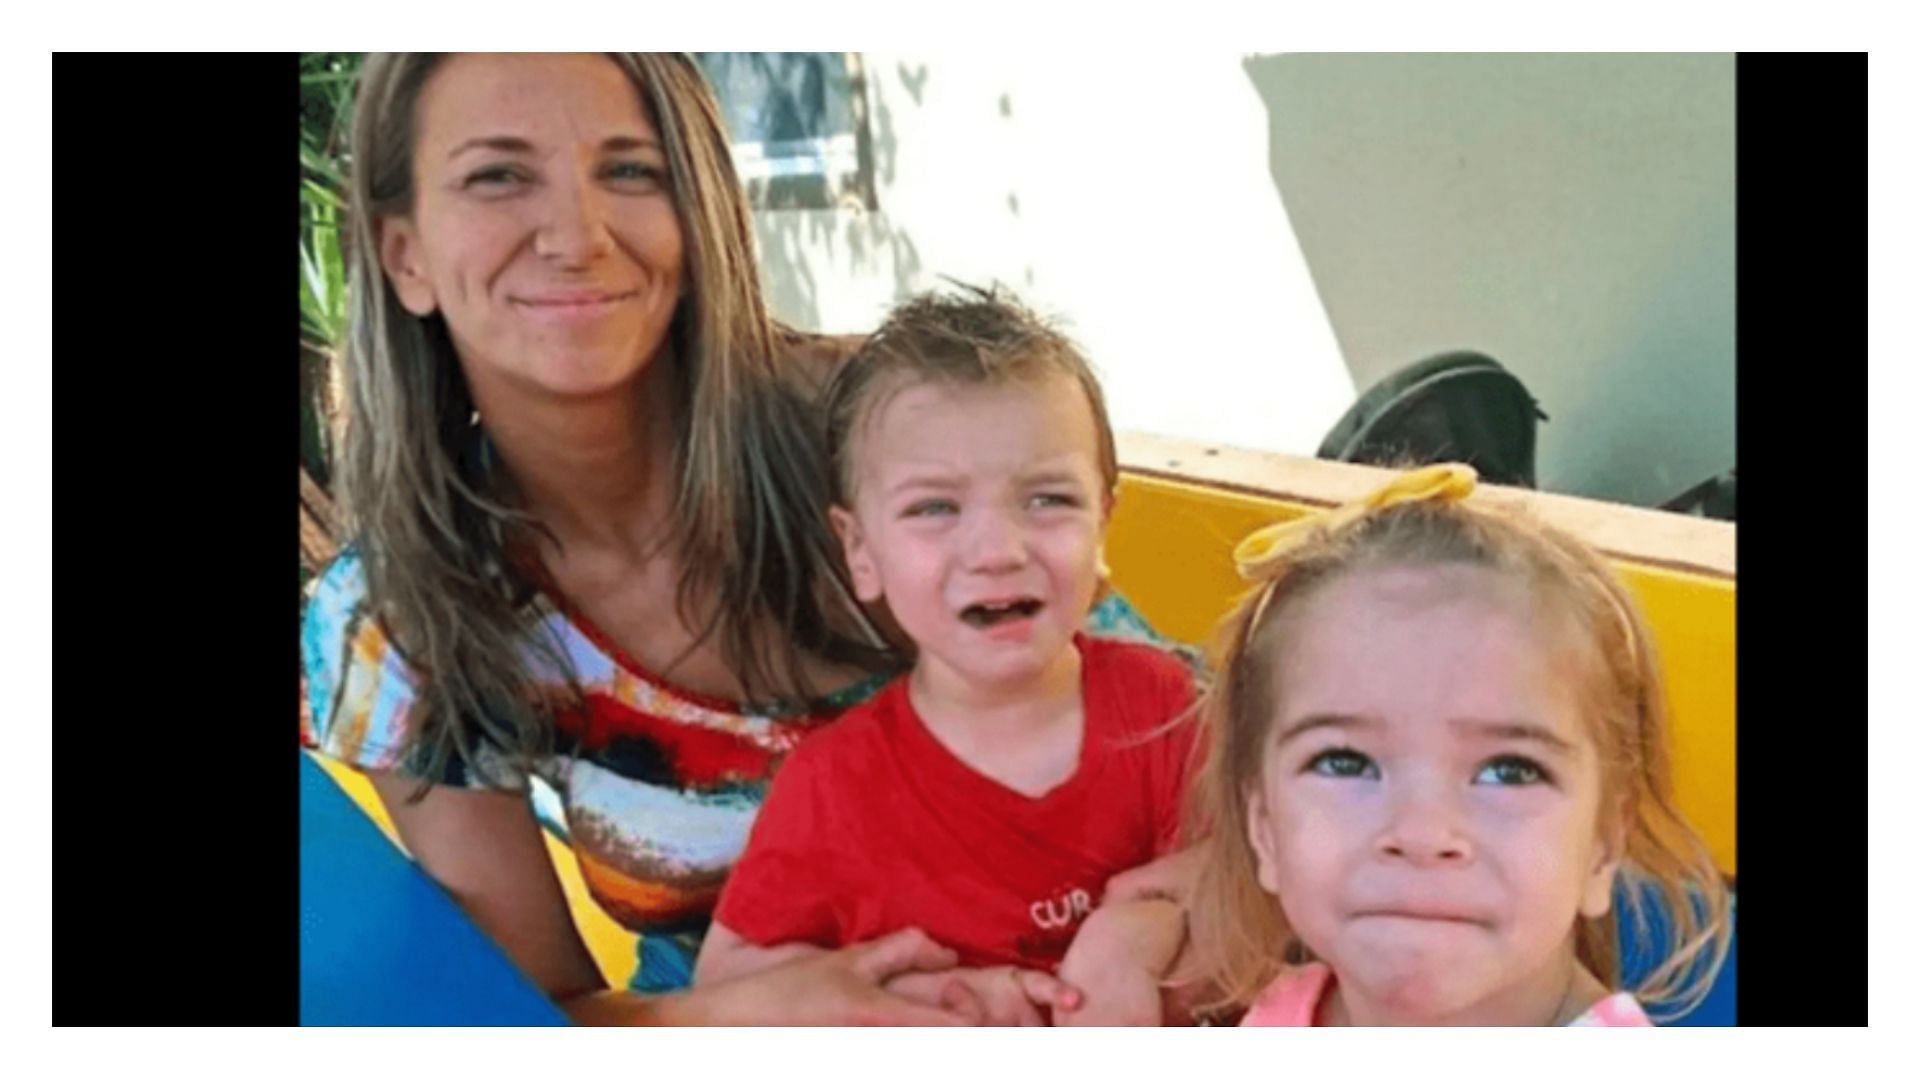 Medical examiners concluded that Andrea Langhorst allegedly murdered her children before committing suicide (Photo via GoFundMe)